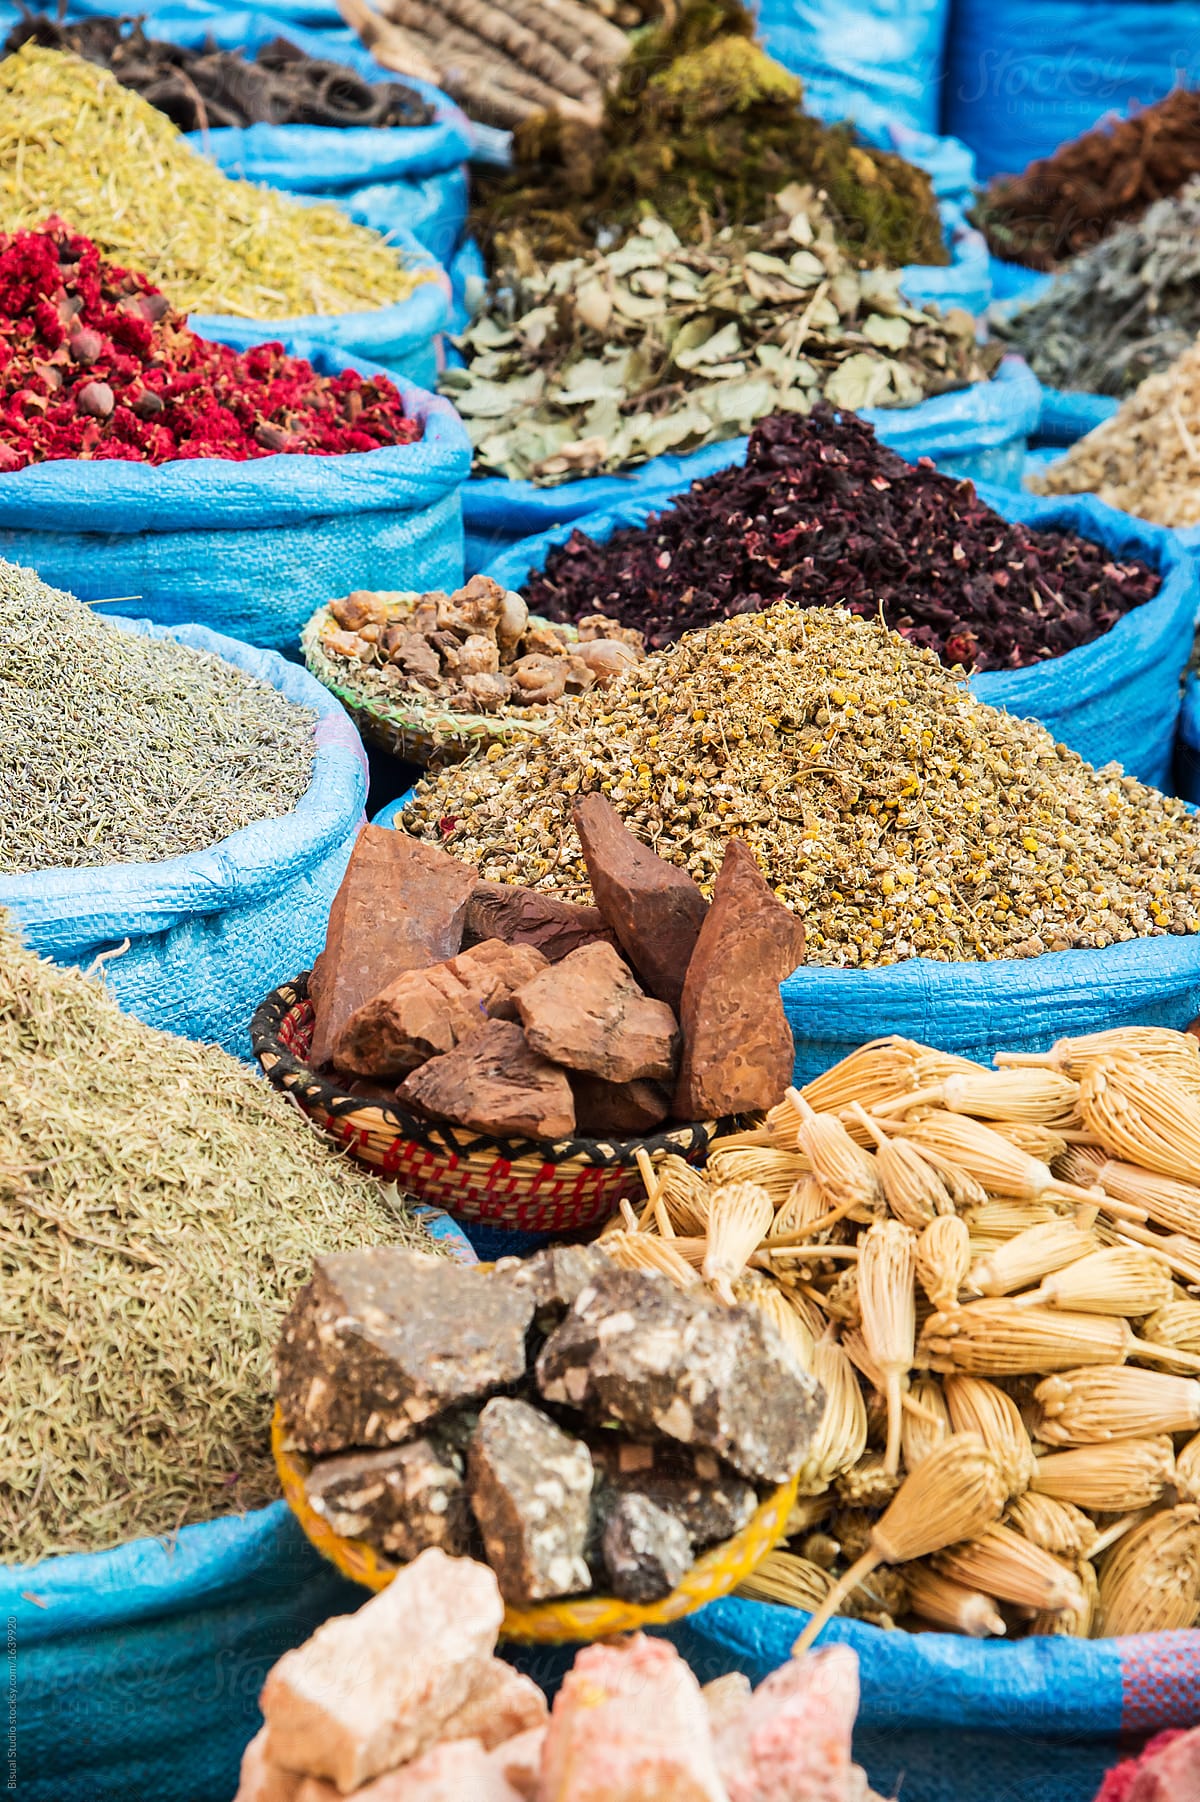 Moroccan spices at souk market